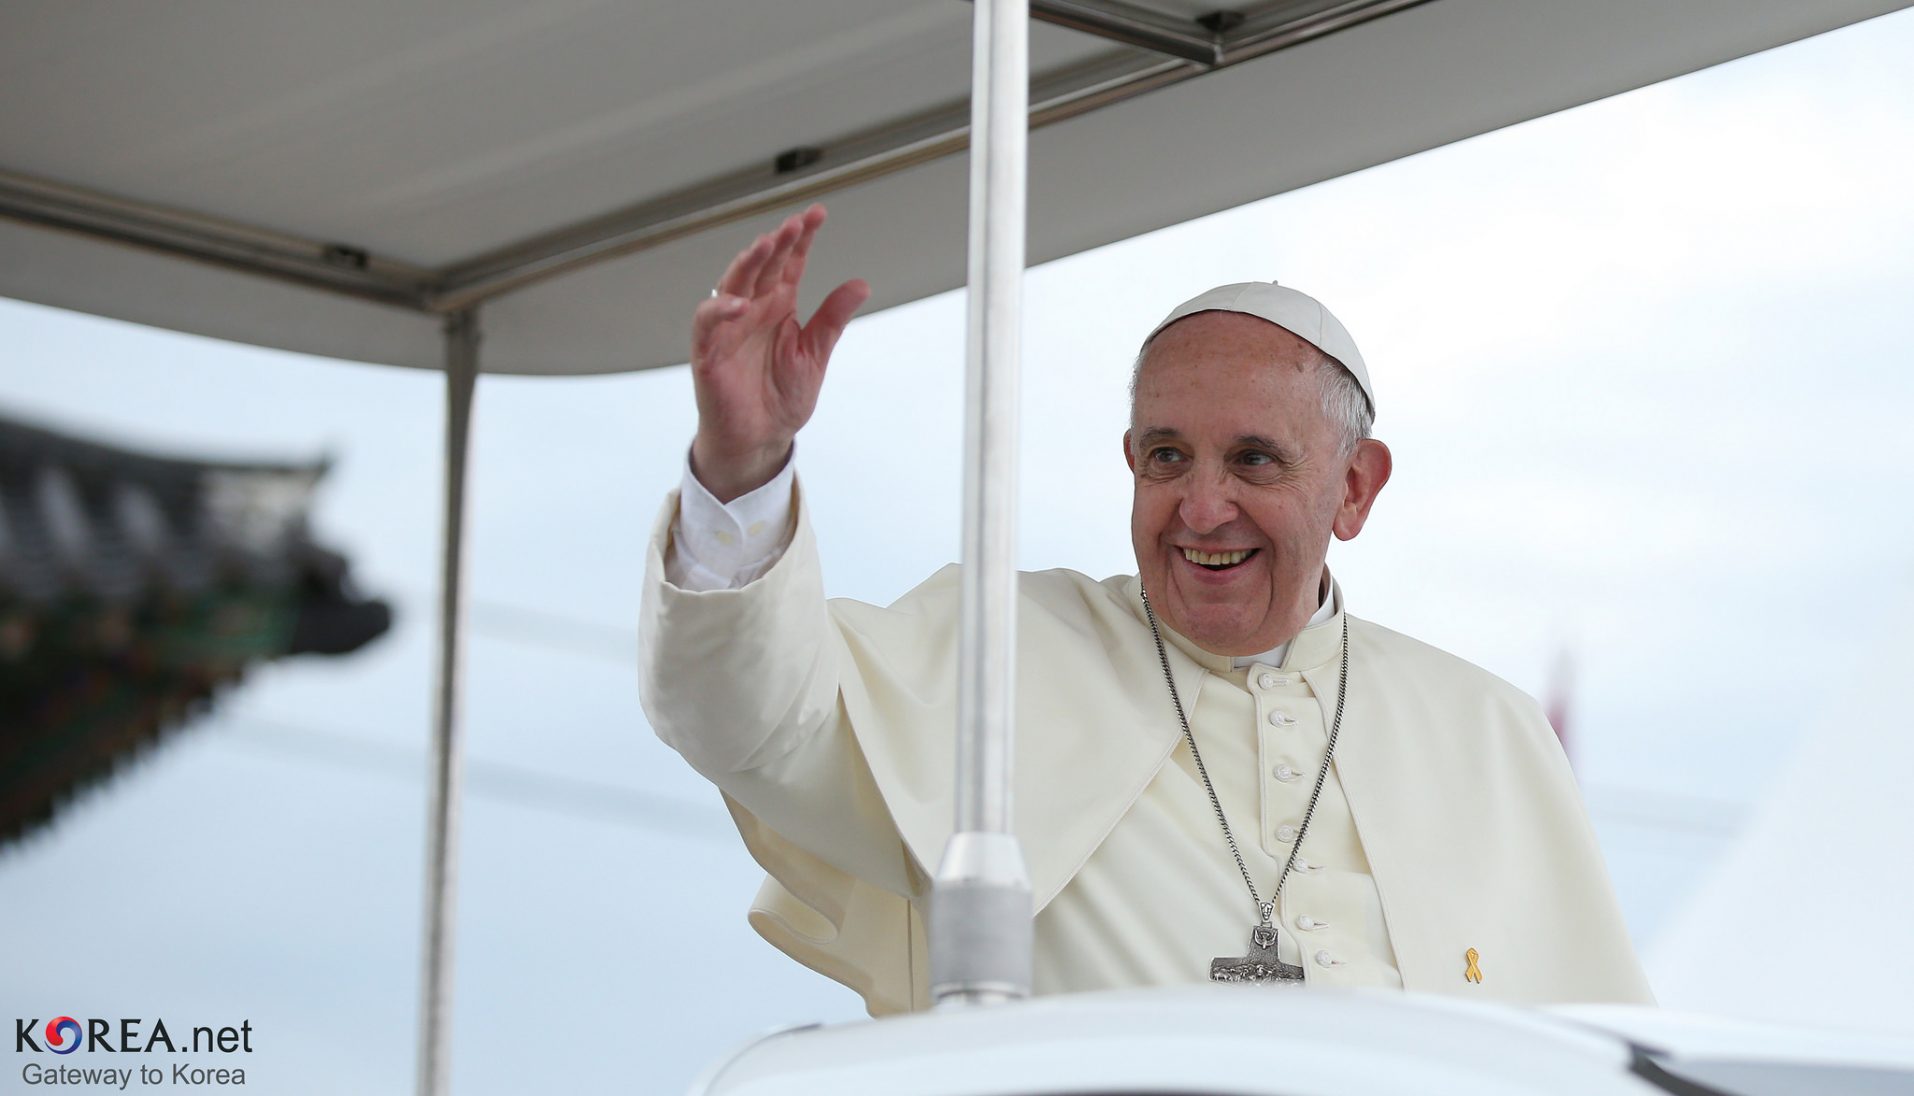 2014 Pastoral visit of Pope France to Korea. Photo source: Republic of Korea (Flickr). Creative Commons.